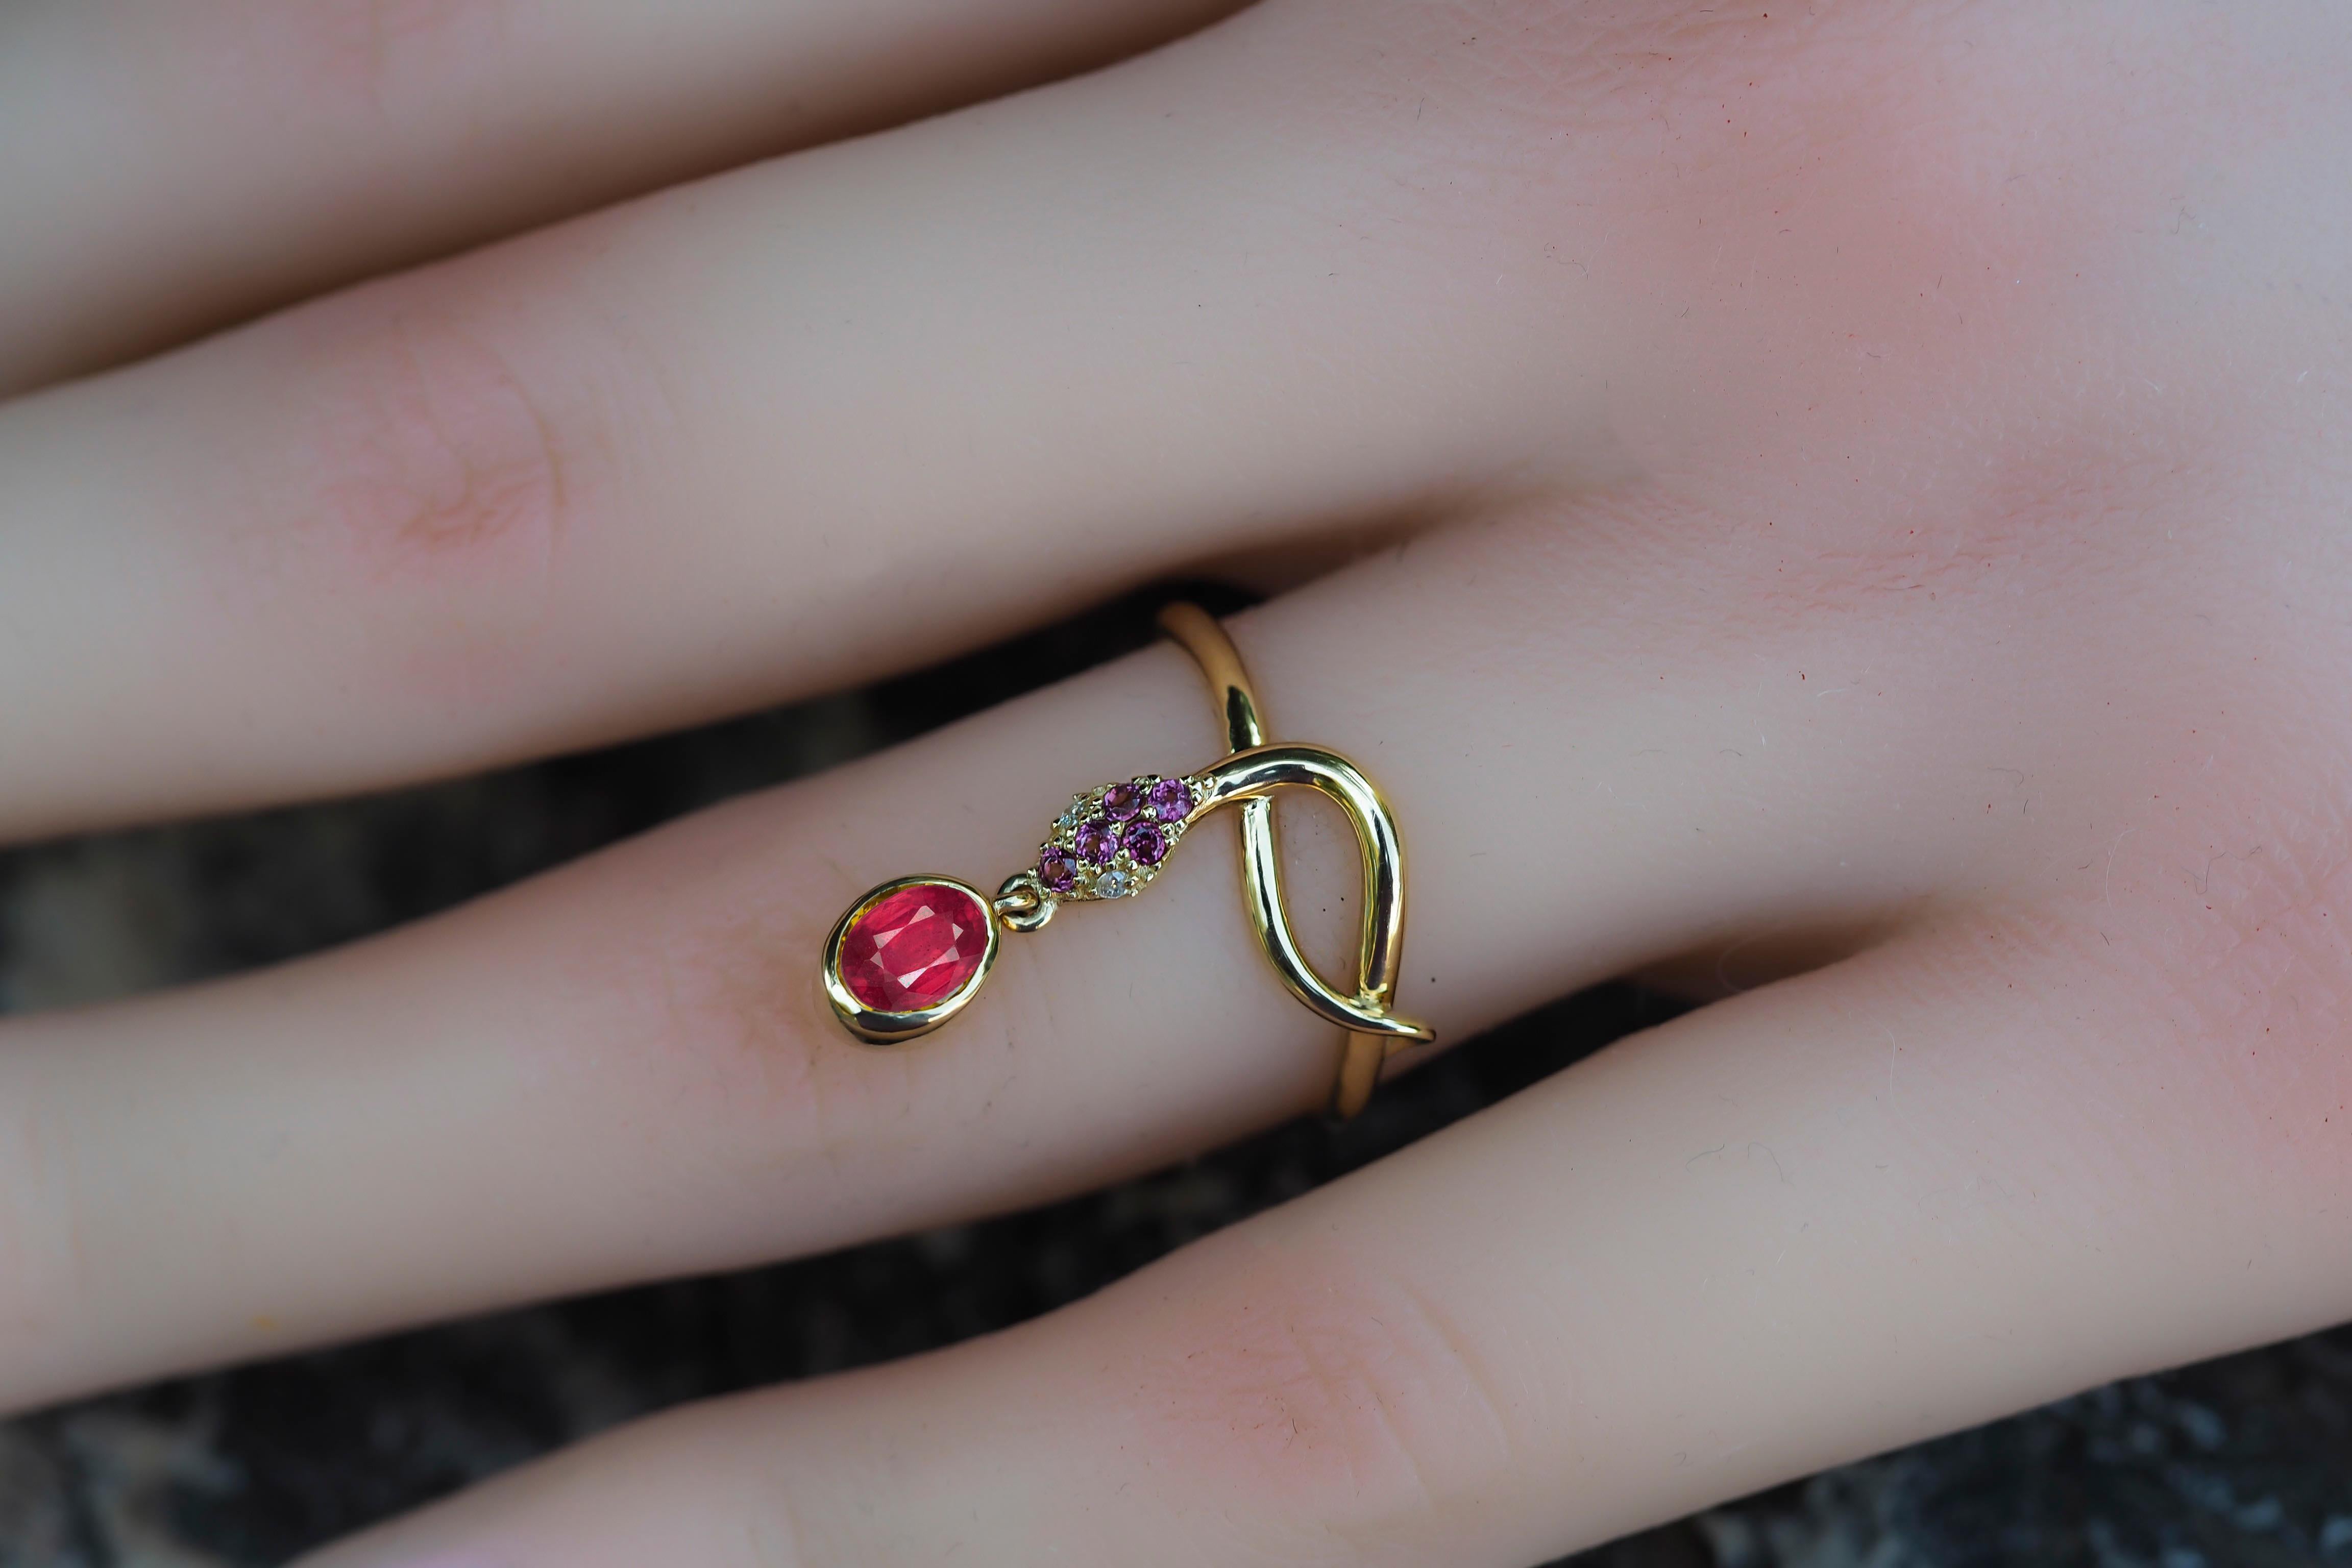 Snake ring with Ruby. 
Ruby gold ring. Snake gold ring. Genuine Ruby ring. Oval Ruby ring. July birthstone ring.

Metal: 14k gold.
Weight: 2.25 g. depends from size.

Gemstones:
Ruby: color - red
Oval cut, 0.8 ct. approx
Clarity: Transparent with